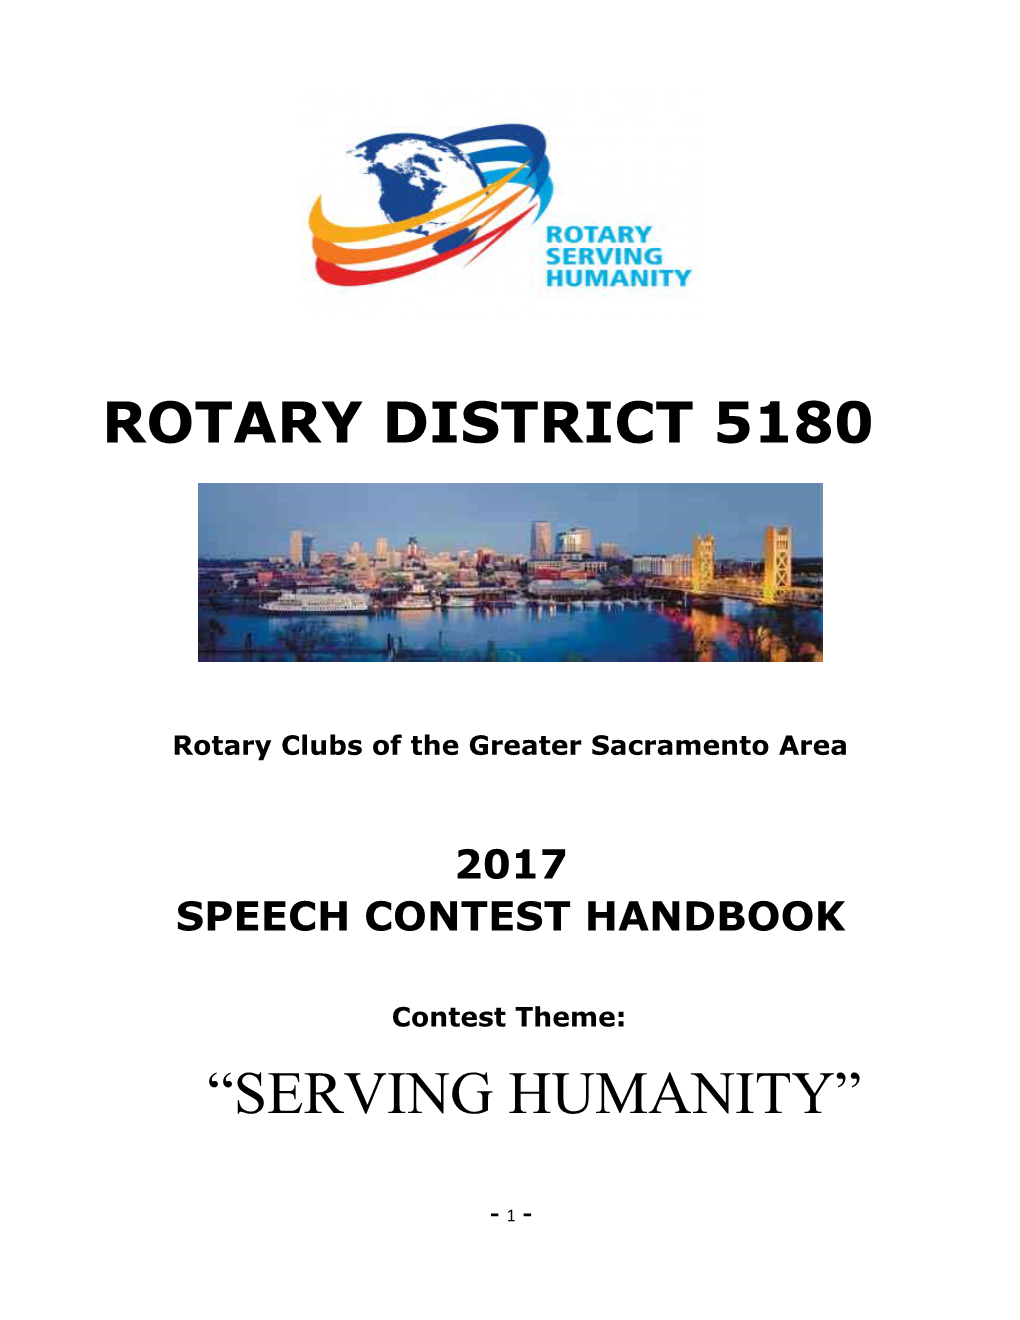 Rotary Clubs of the Greater Sacramento Area